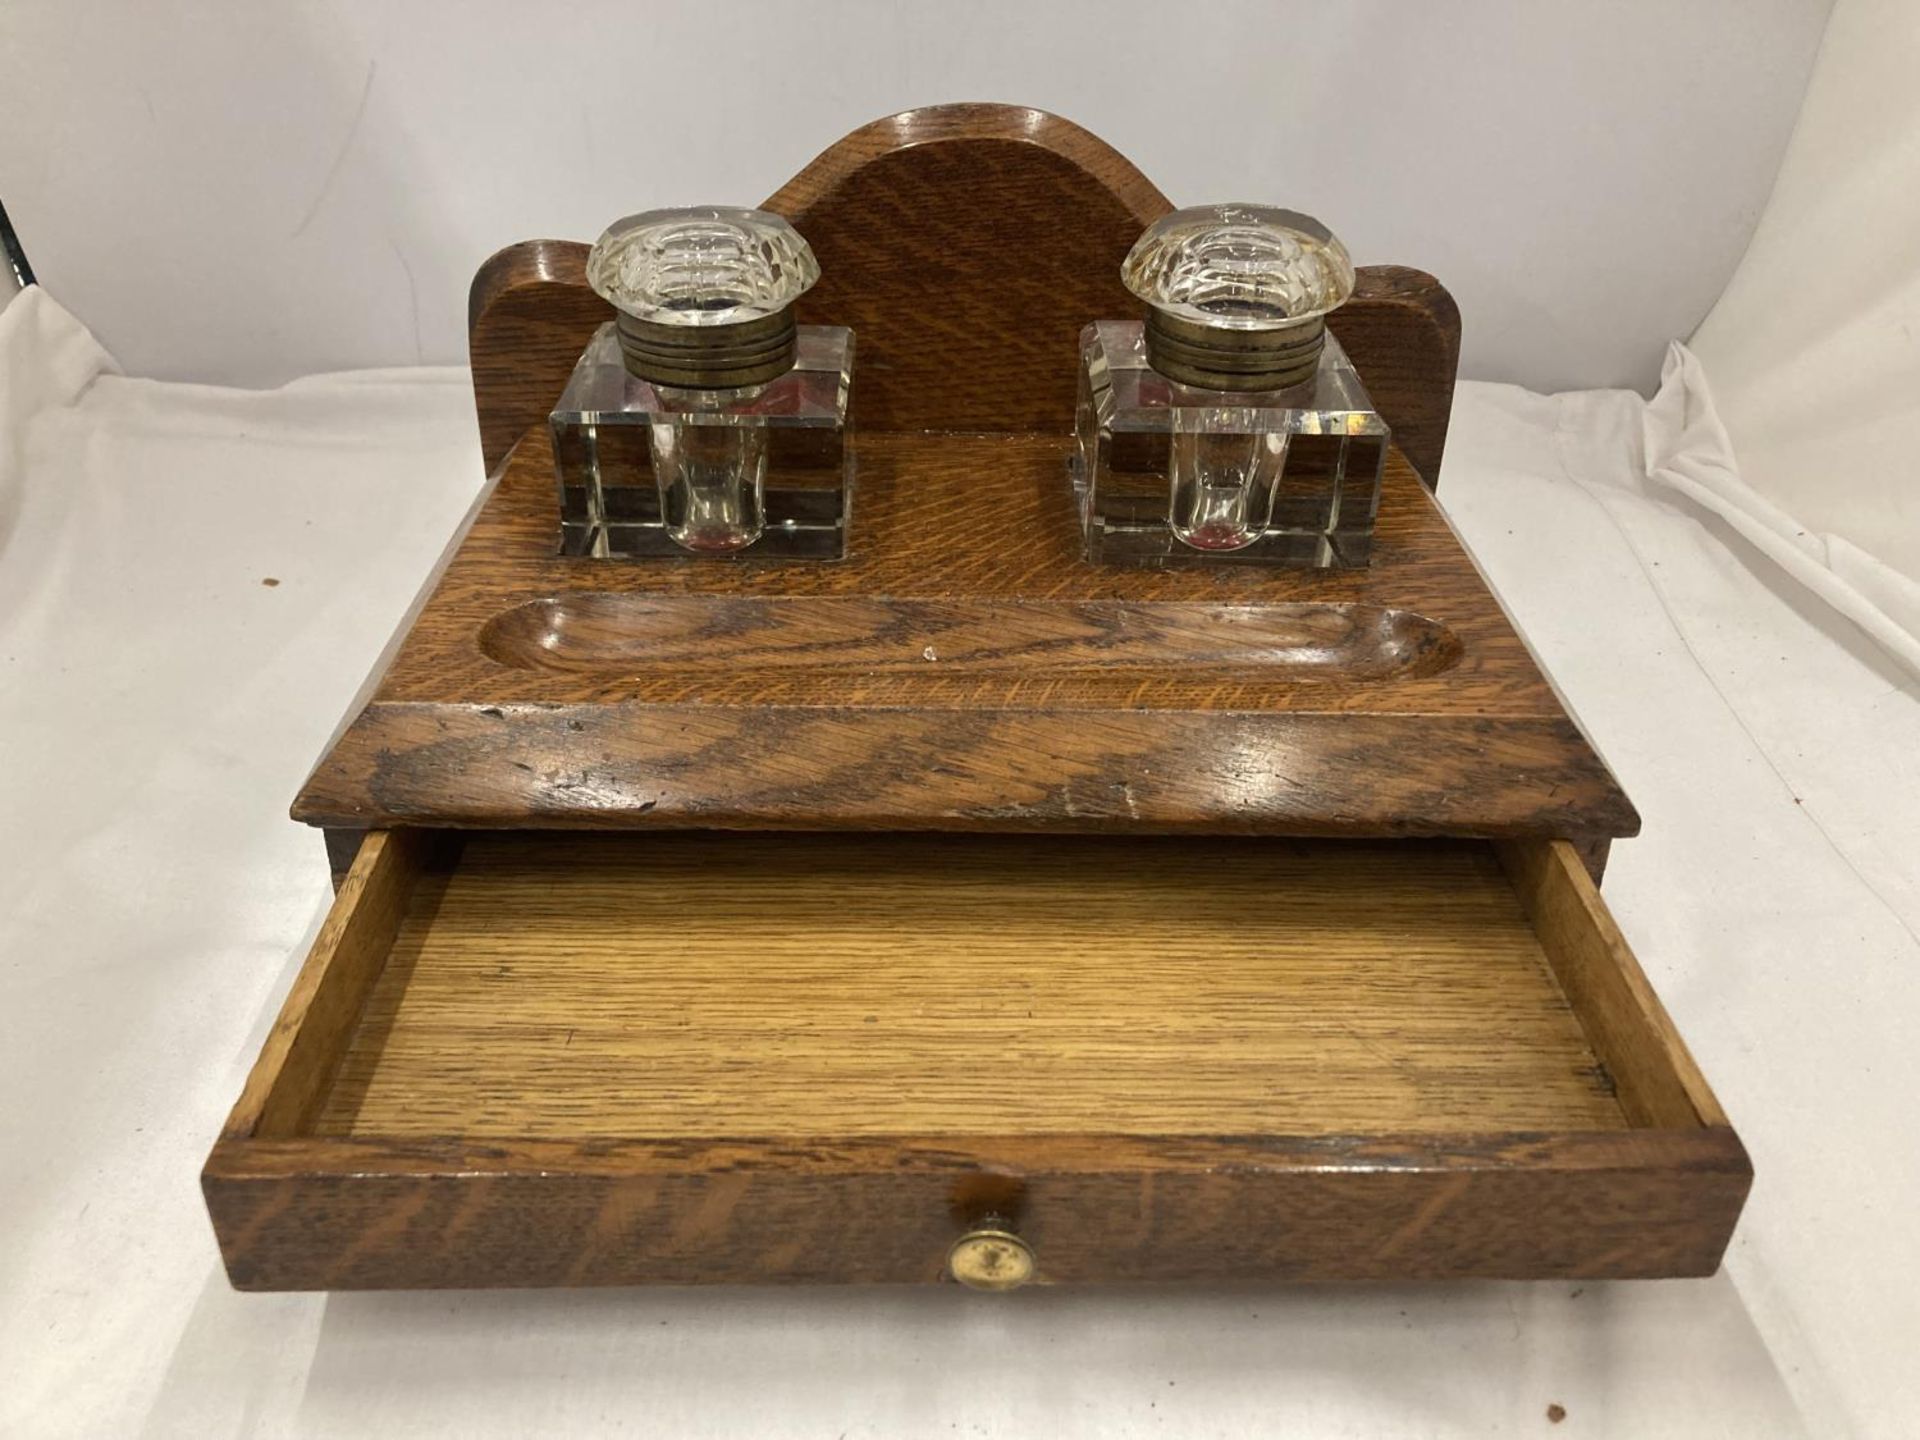 A DESK SET WITH LOWER DRAWER AND TWO ORIGINAL GLASS BOTTLES - Bild 2 aus 5